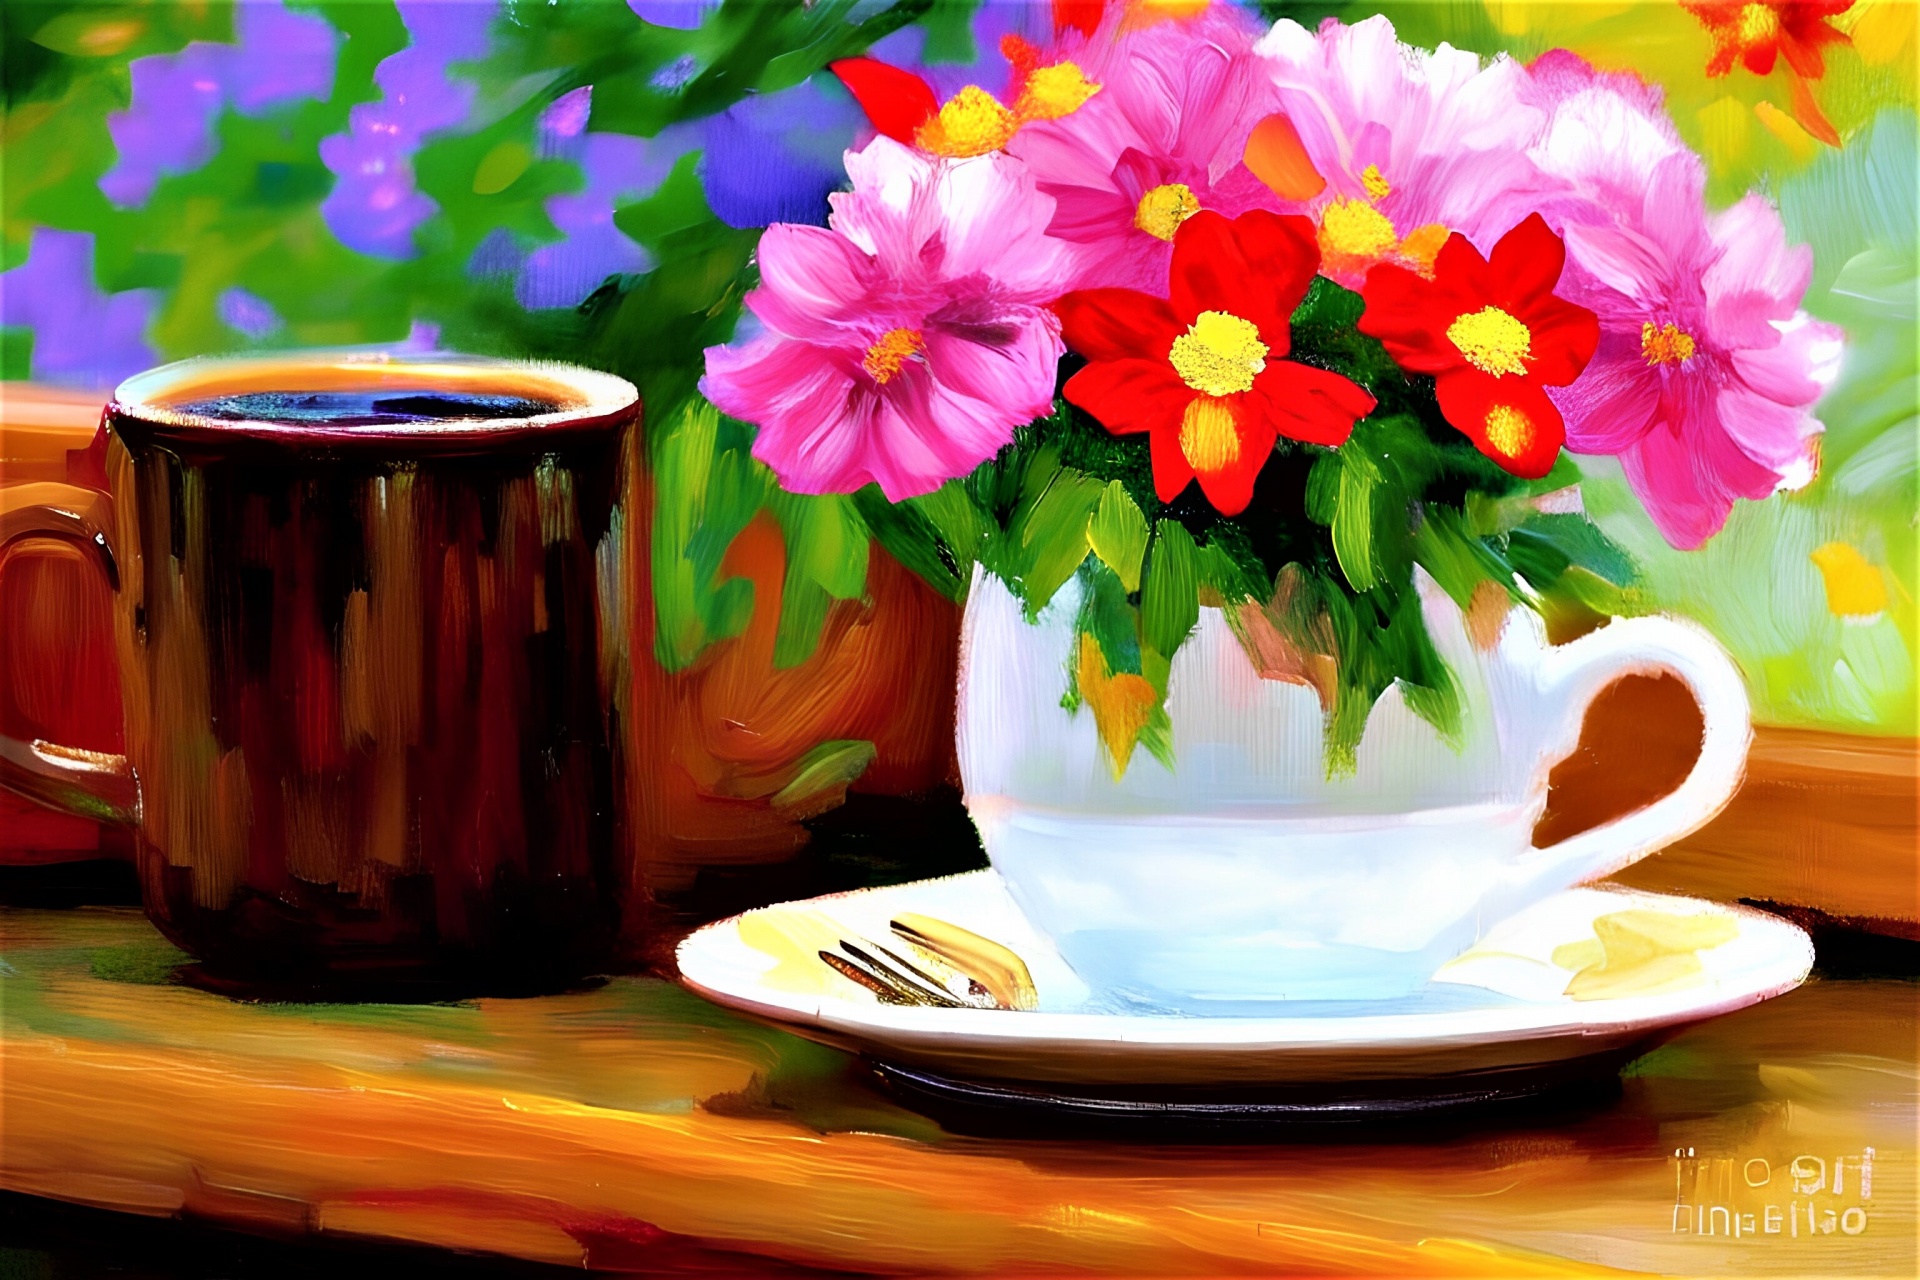 Painting Coffee And Cup Of Flowers